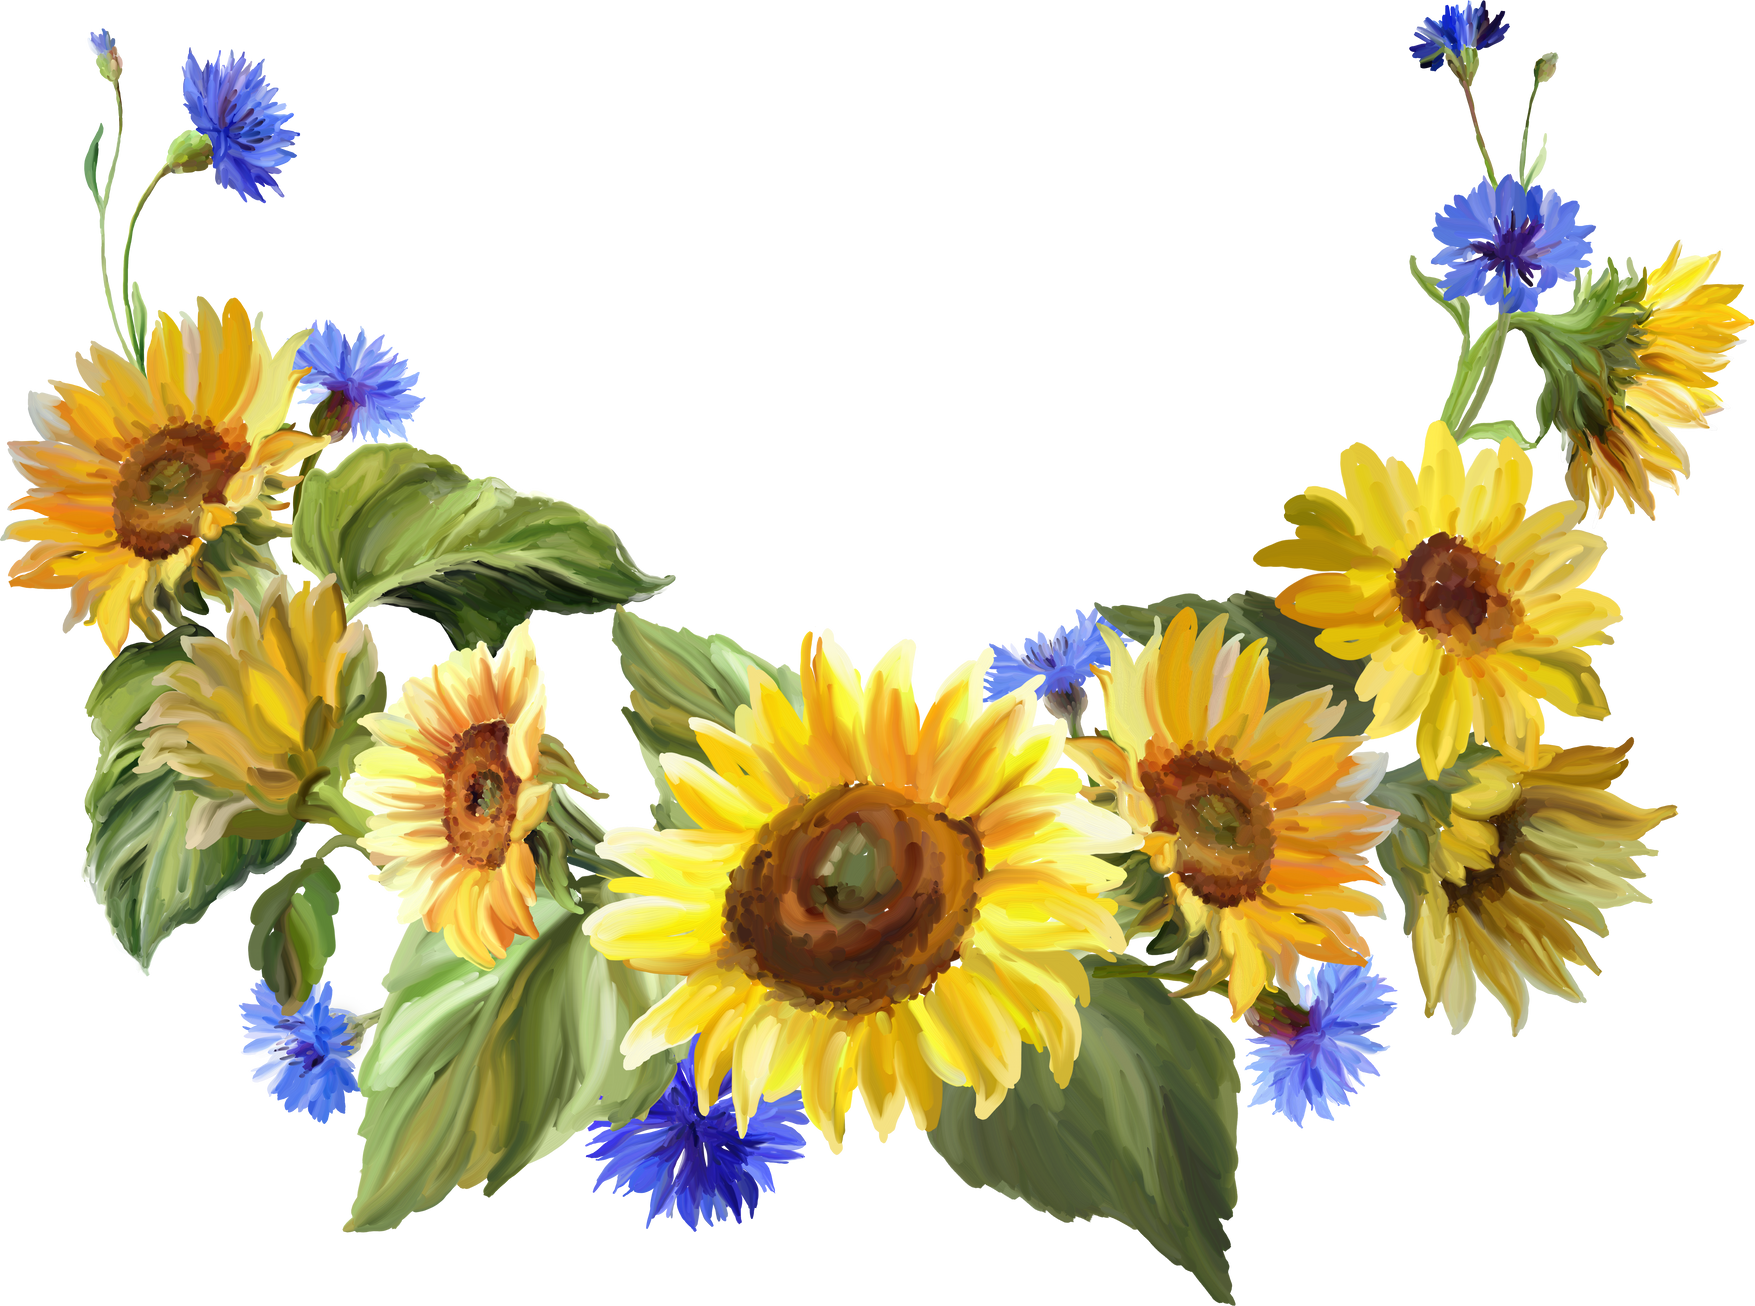 Wreath with sunflowers and cornflowers